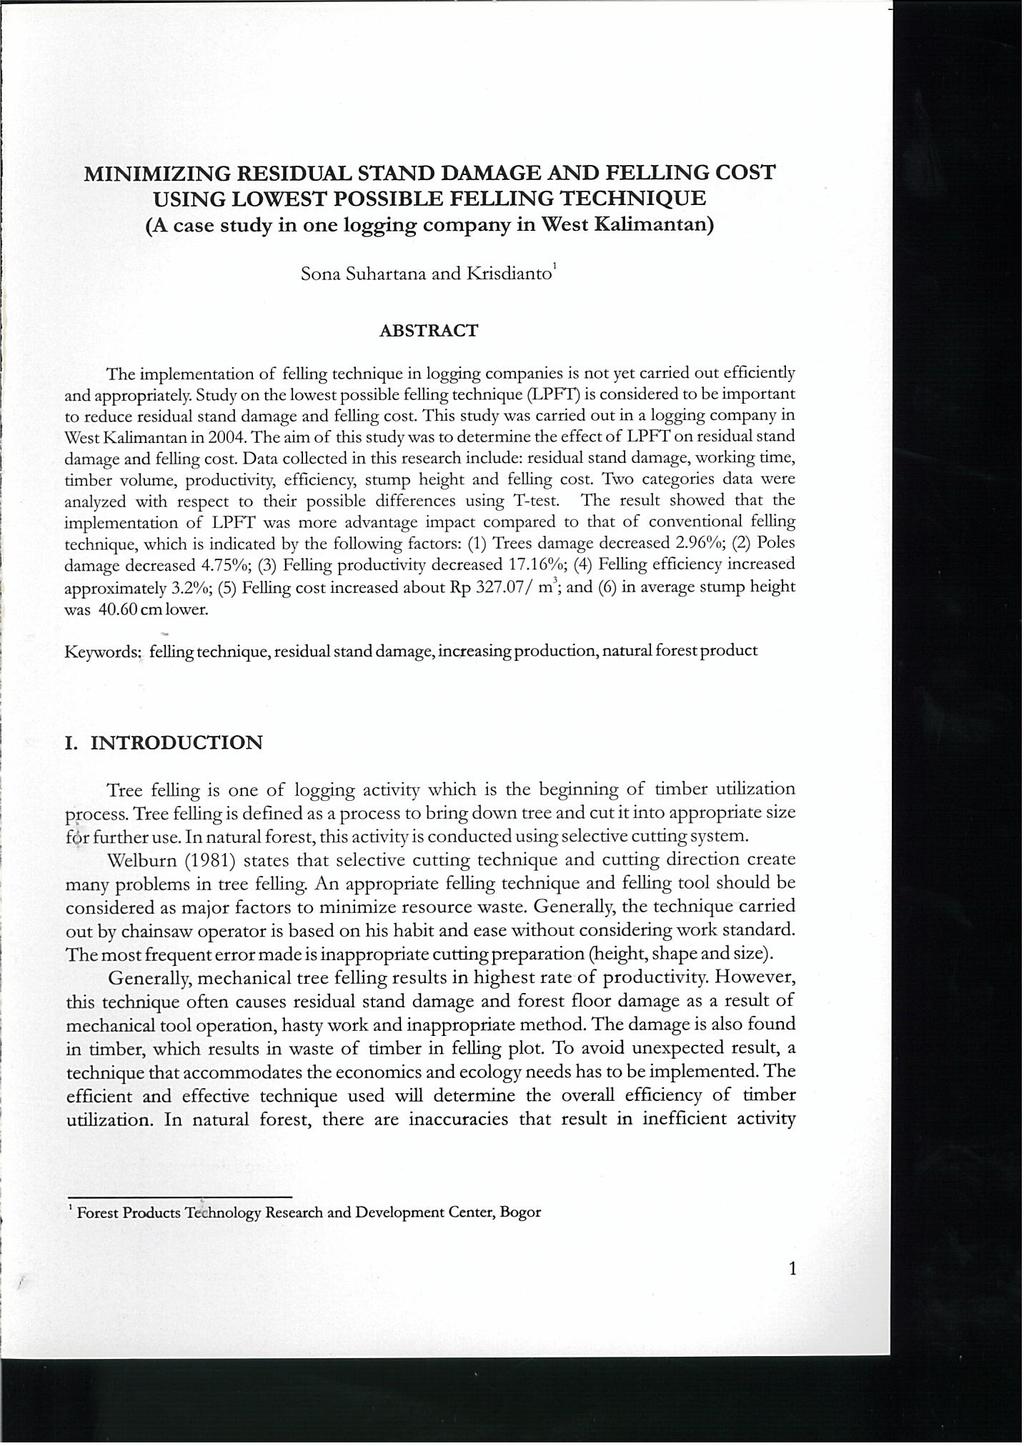 MINIMIZING RESIDUAL STAND DAMAGE AND FELLING COST USING LOWEST POSSIBLE FELLING TECHNIQUE (A case study in one logging company in West Kalimantan) Sona Suhartana and Krisclianto' ABSTRACT The